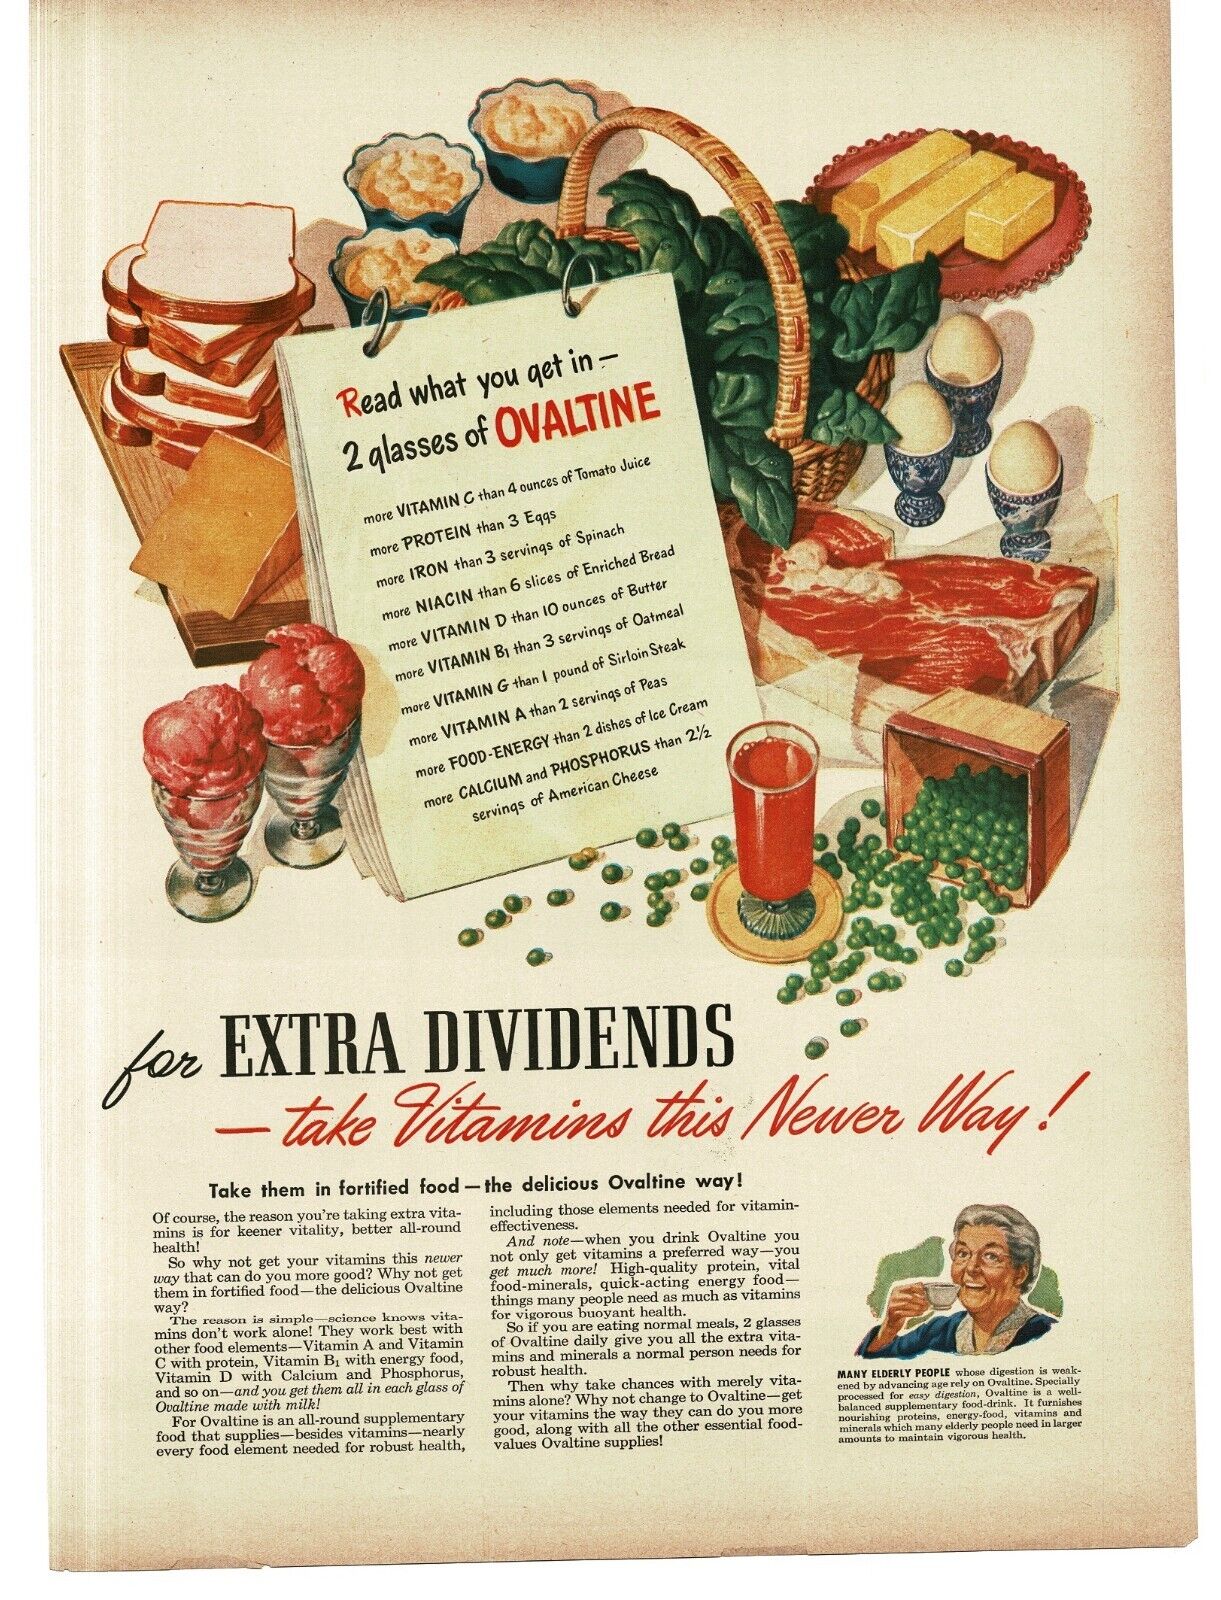 A vintage ad by John C Howard showcasing a Ovaltine drink with a diverse range of foods.